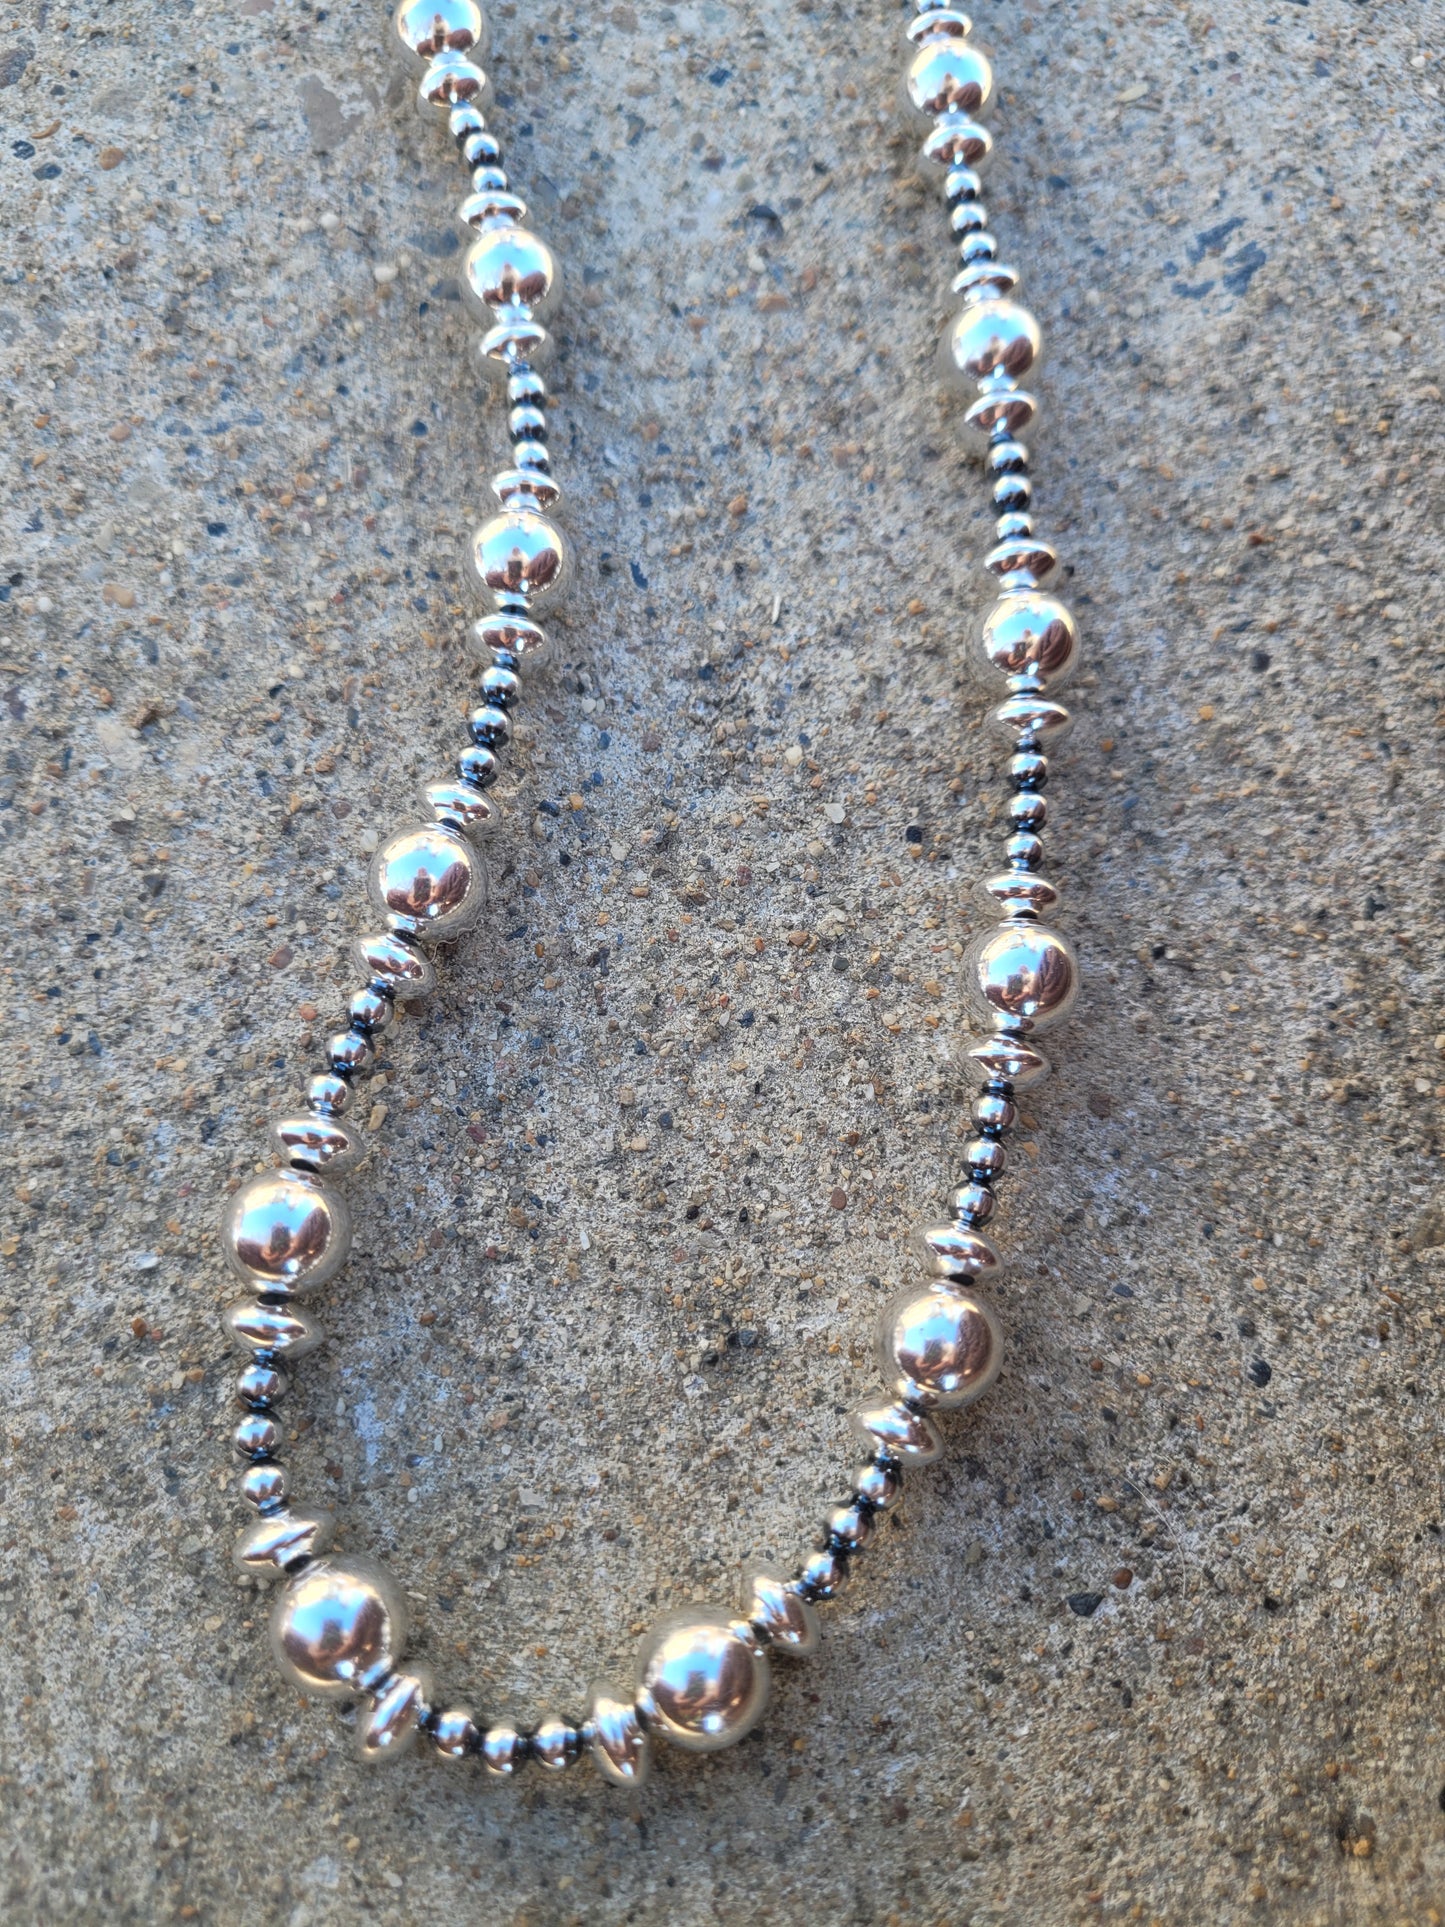 Navajo pearl necklace 23 inches